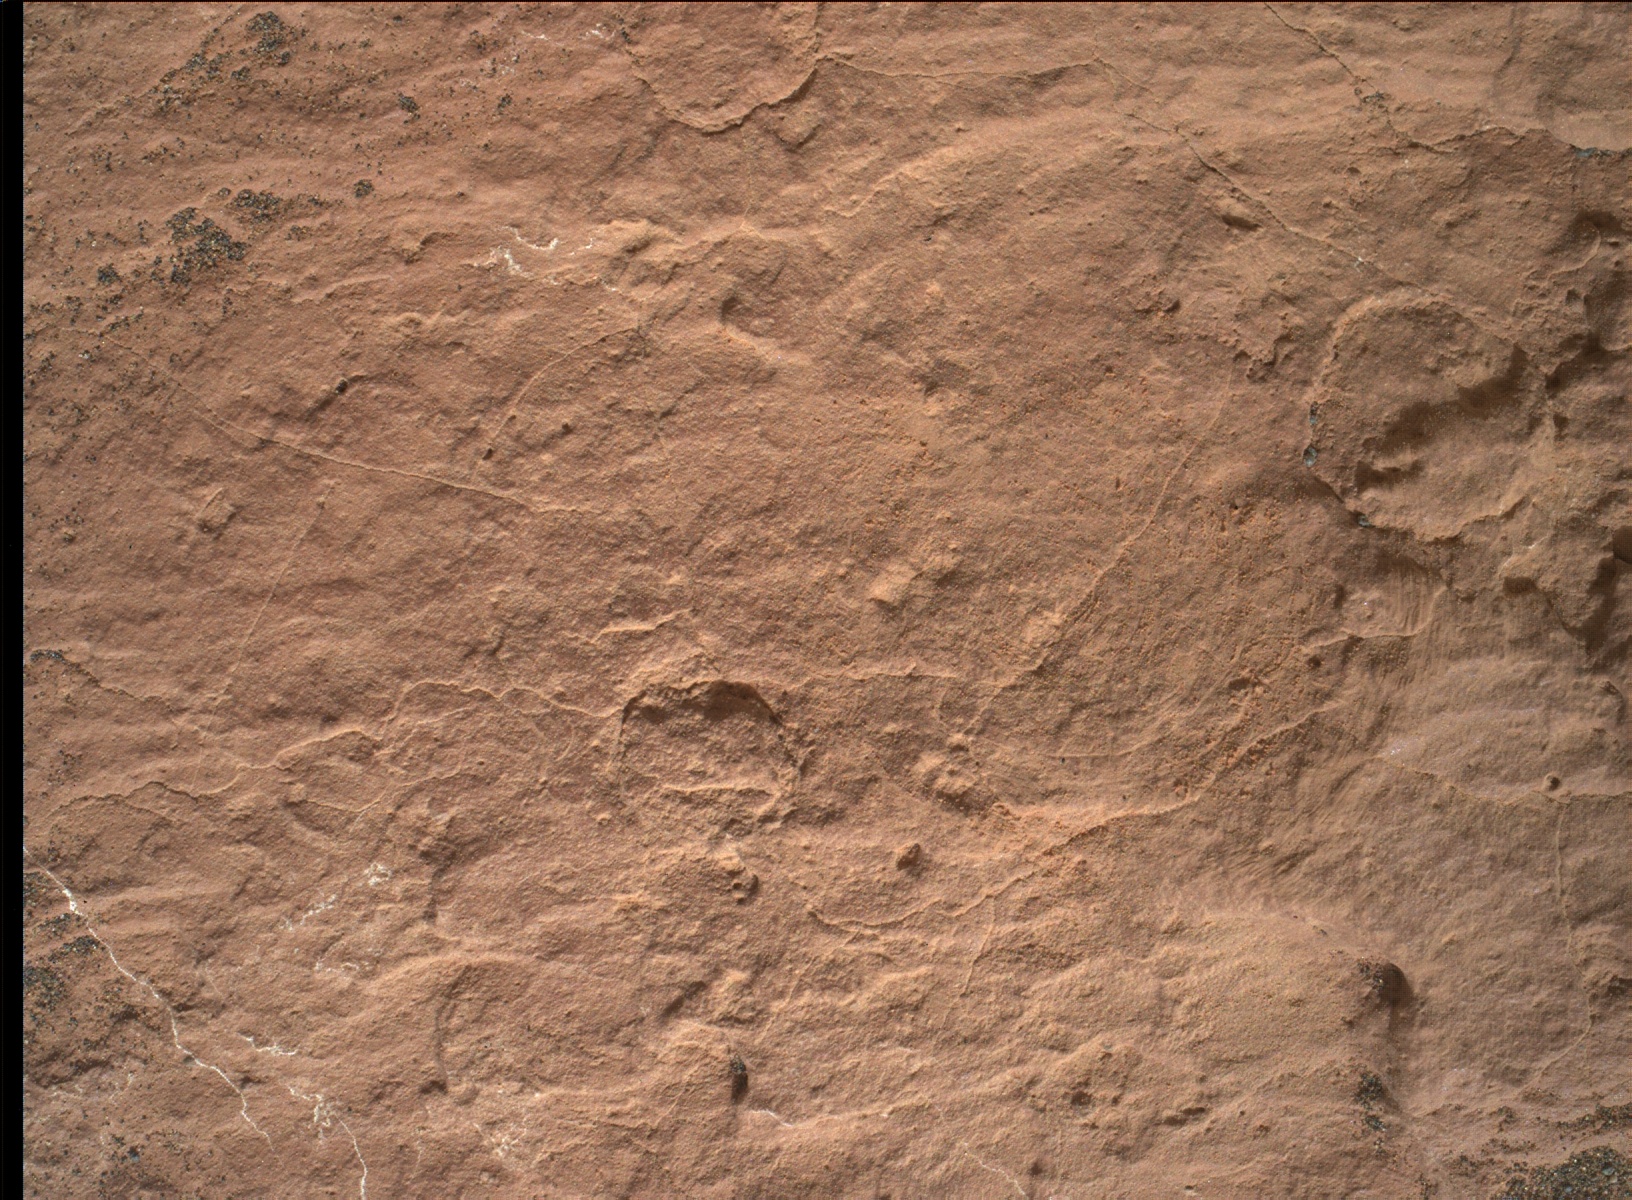 Nasa's Mars rover Curiosity acquired this image using its Mars Hand Lens Imager (MAHLI) on Sol 1586